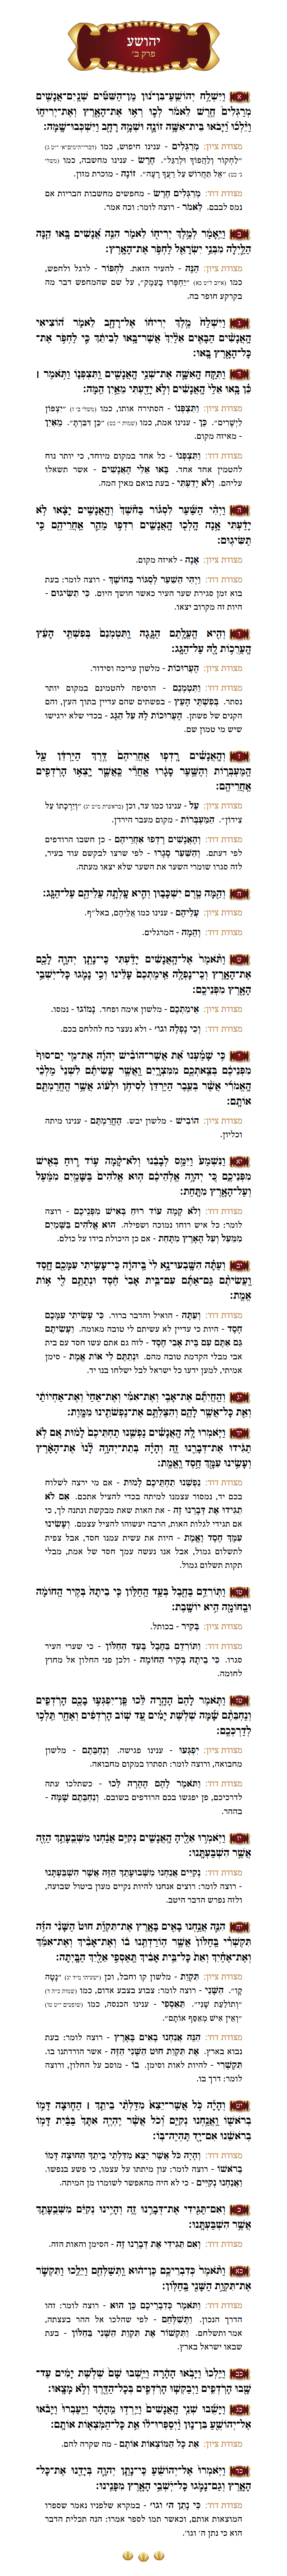 Sefer Yehoshua Chapter 2 with commentary